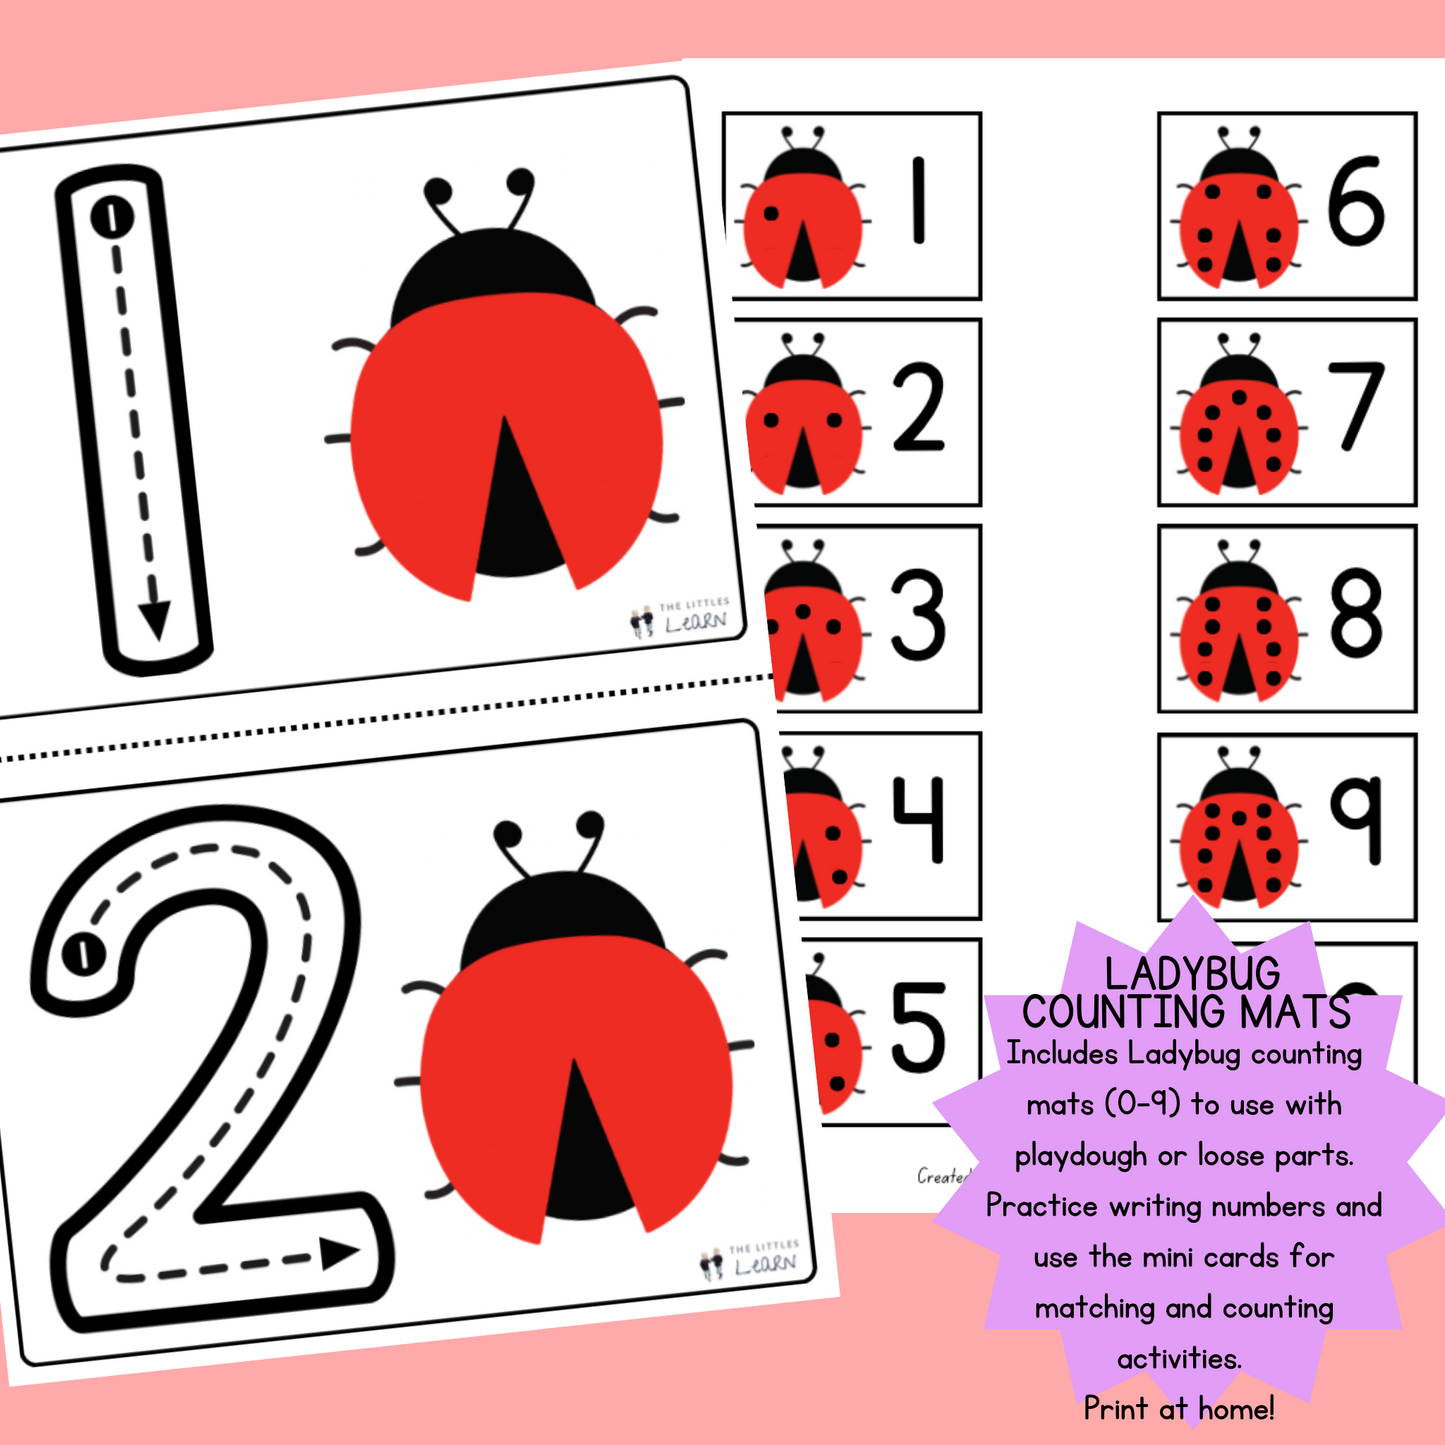 Printable cards with numbers to trace and ladybugs to add spots to.